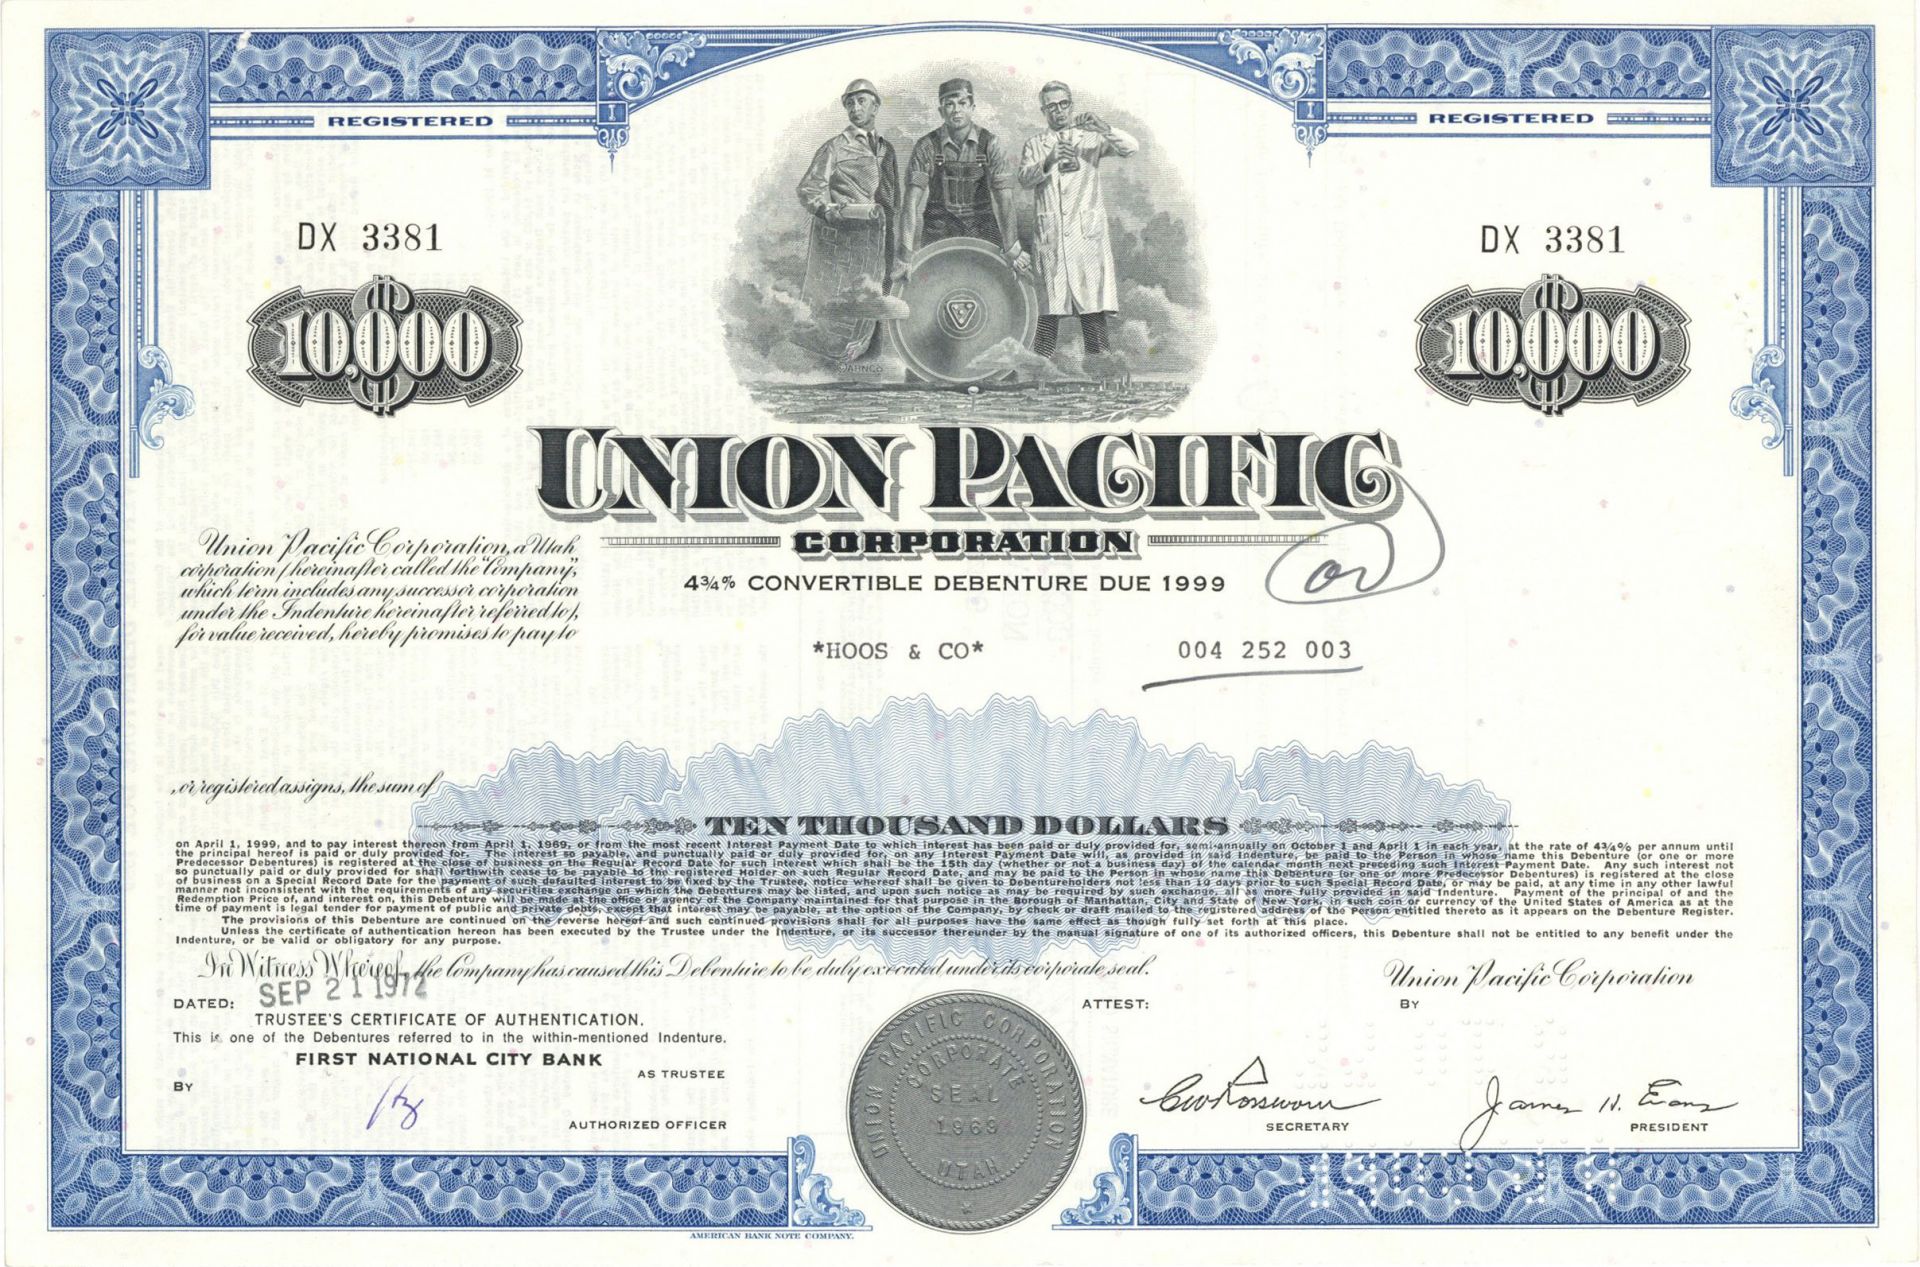 Collectible Union Pacific